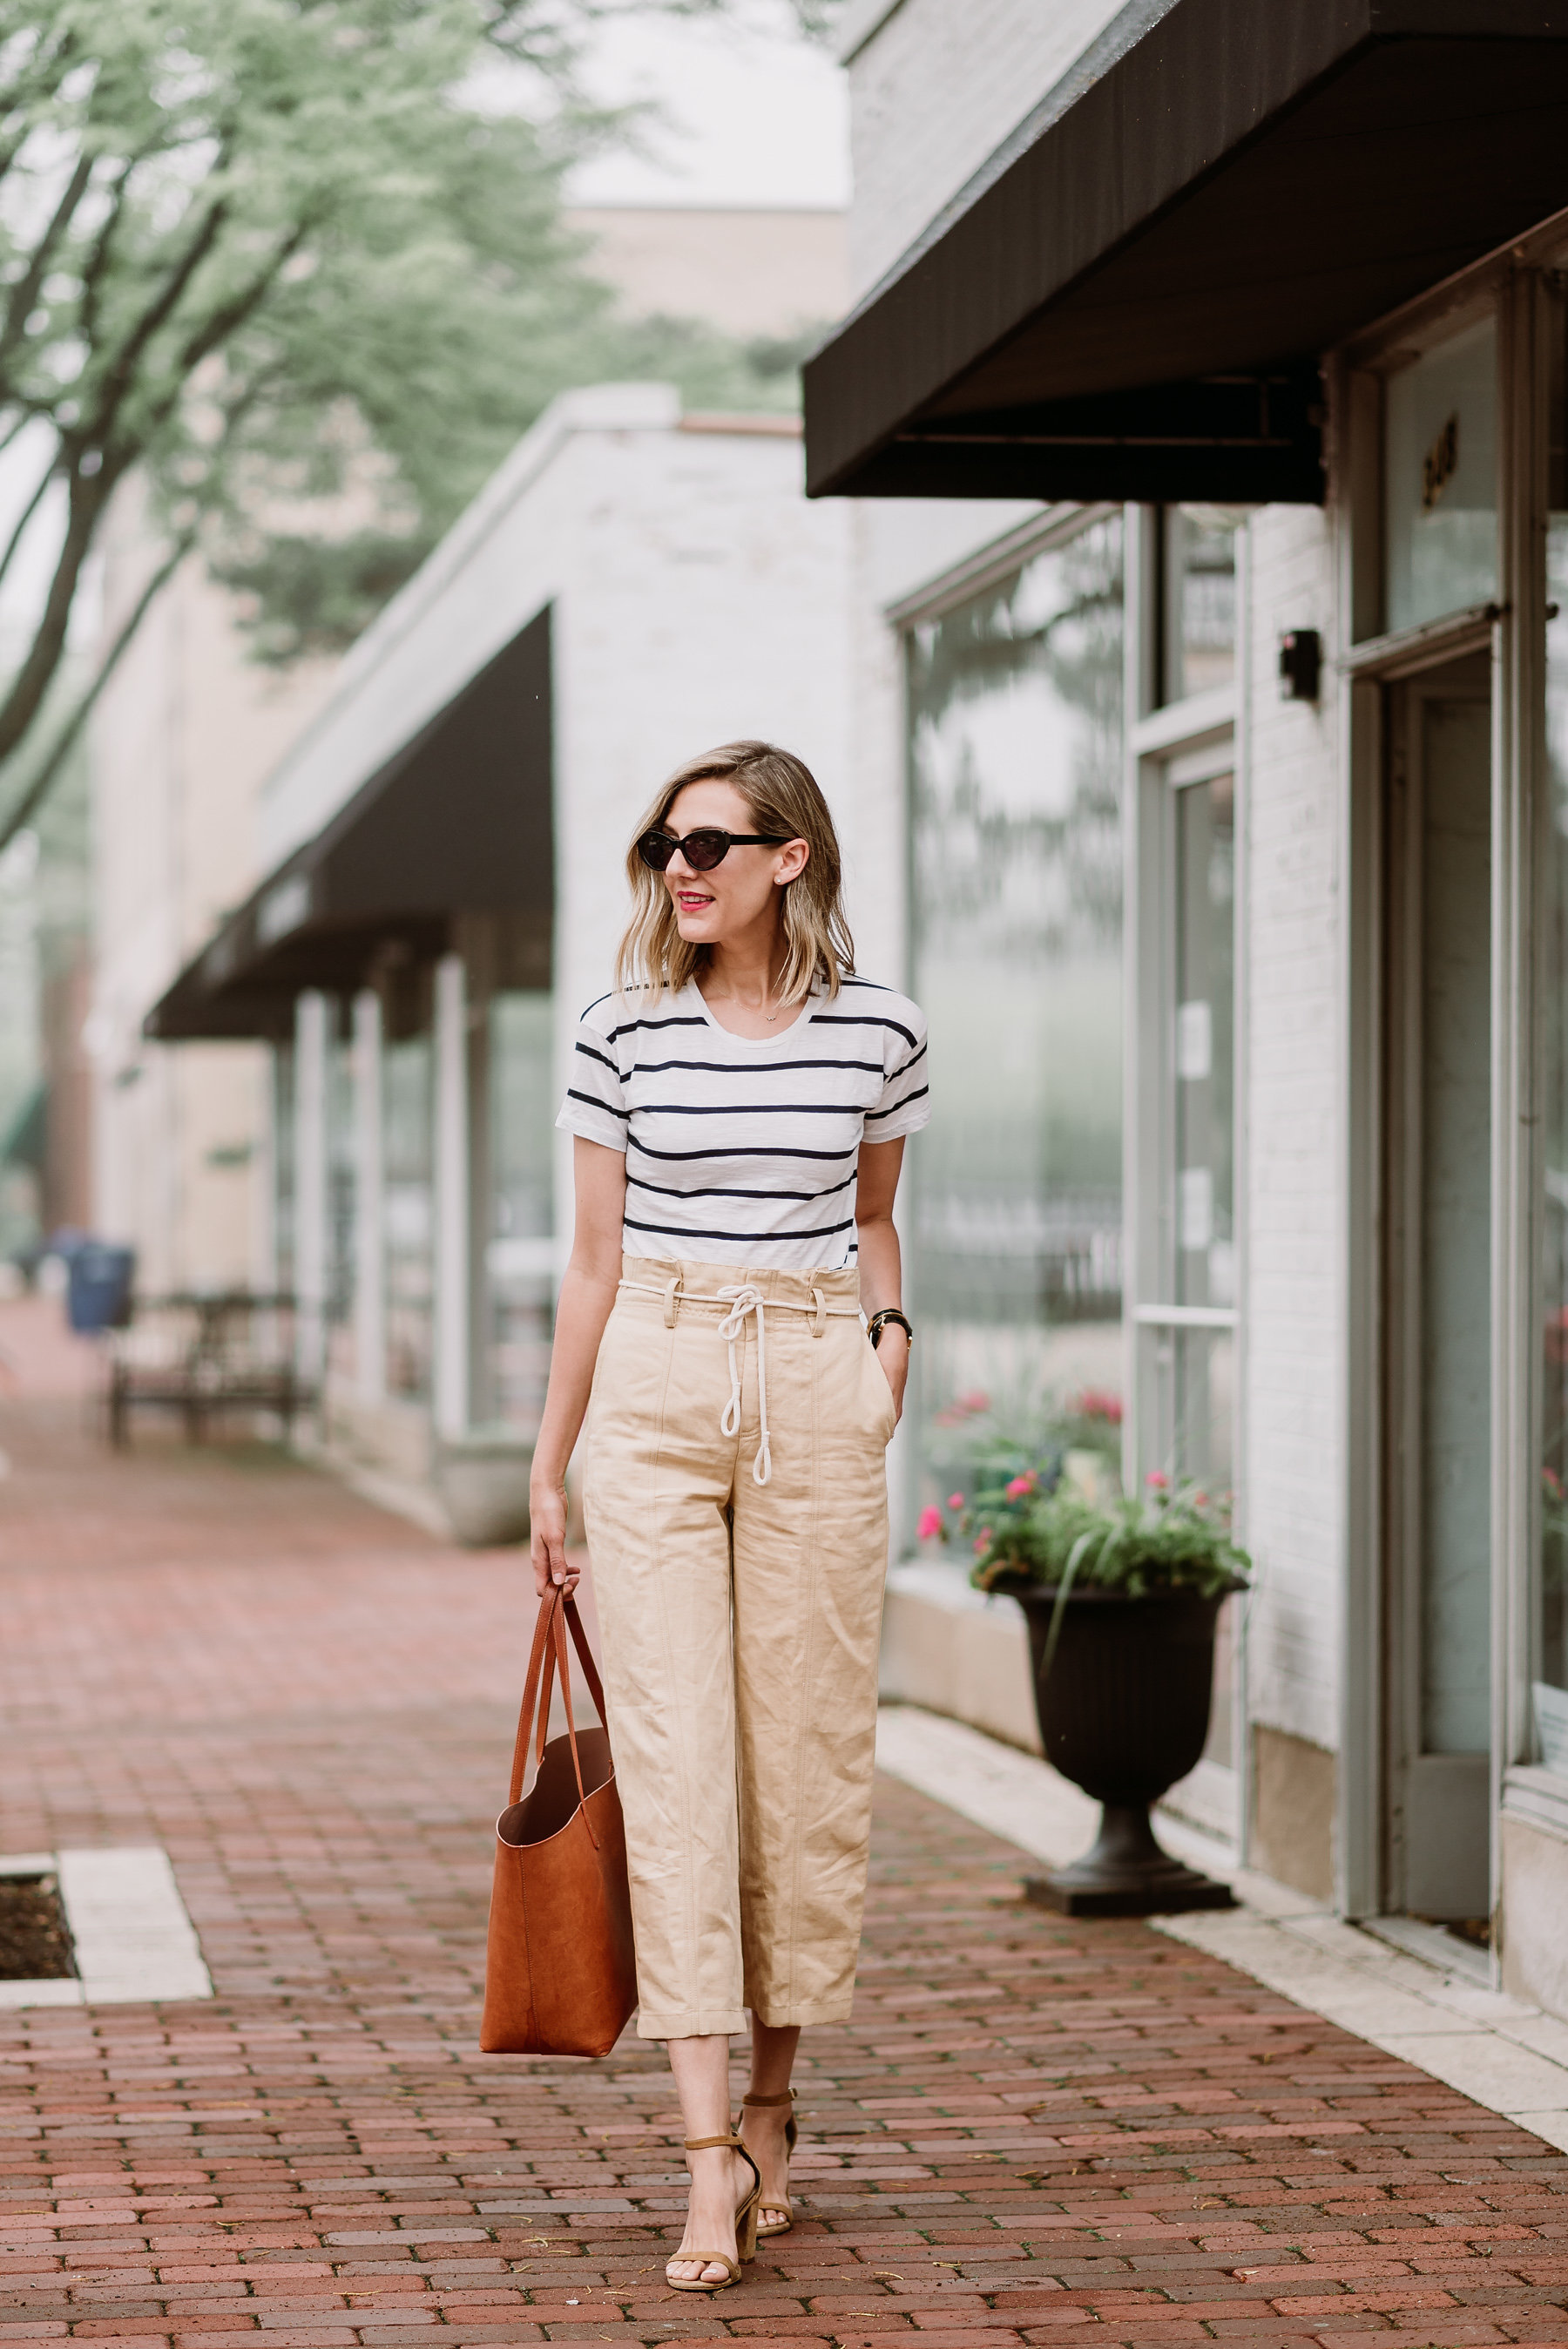 How to style linen pants?